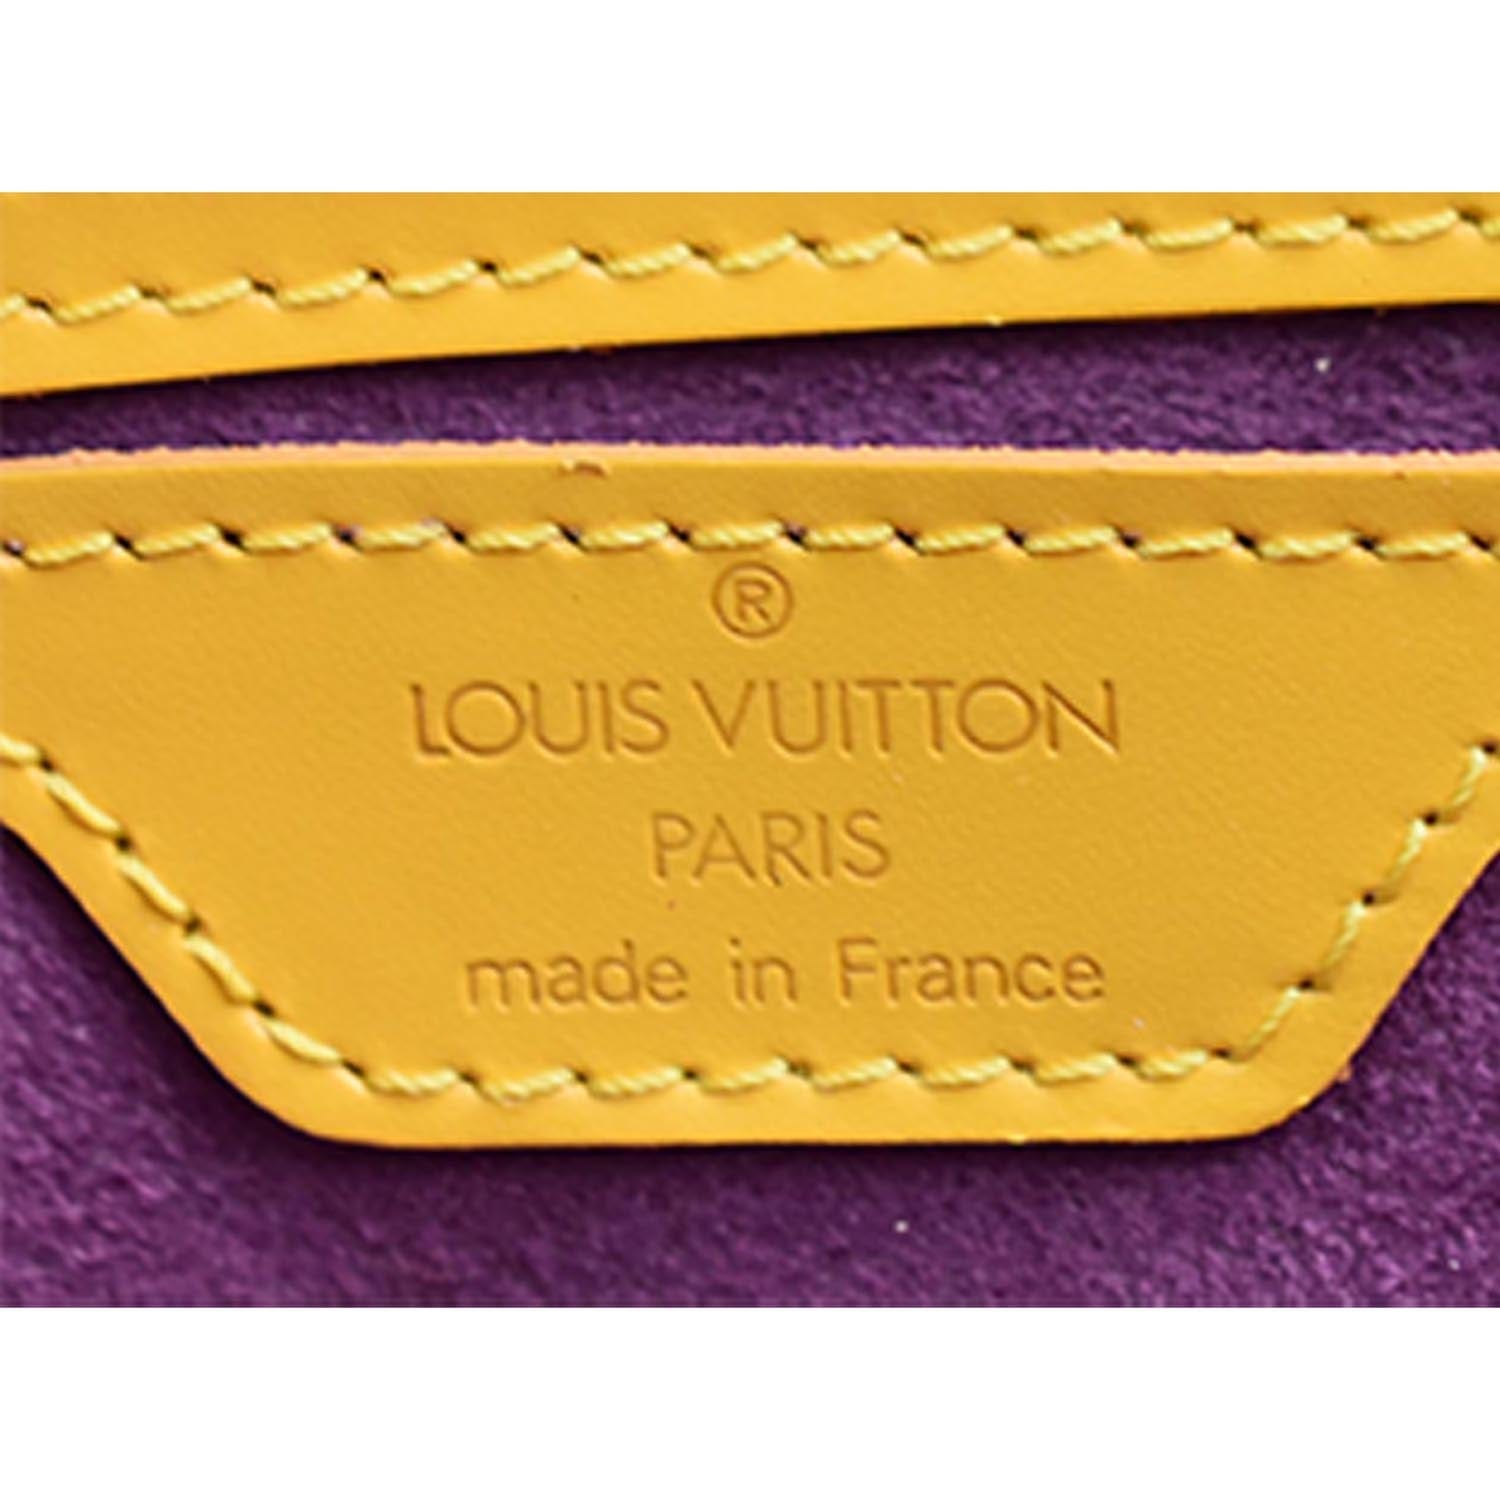 Authentic New Louis Vuitton Yellow Epi Leather French Wallet